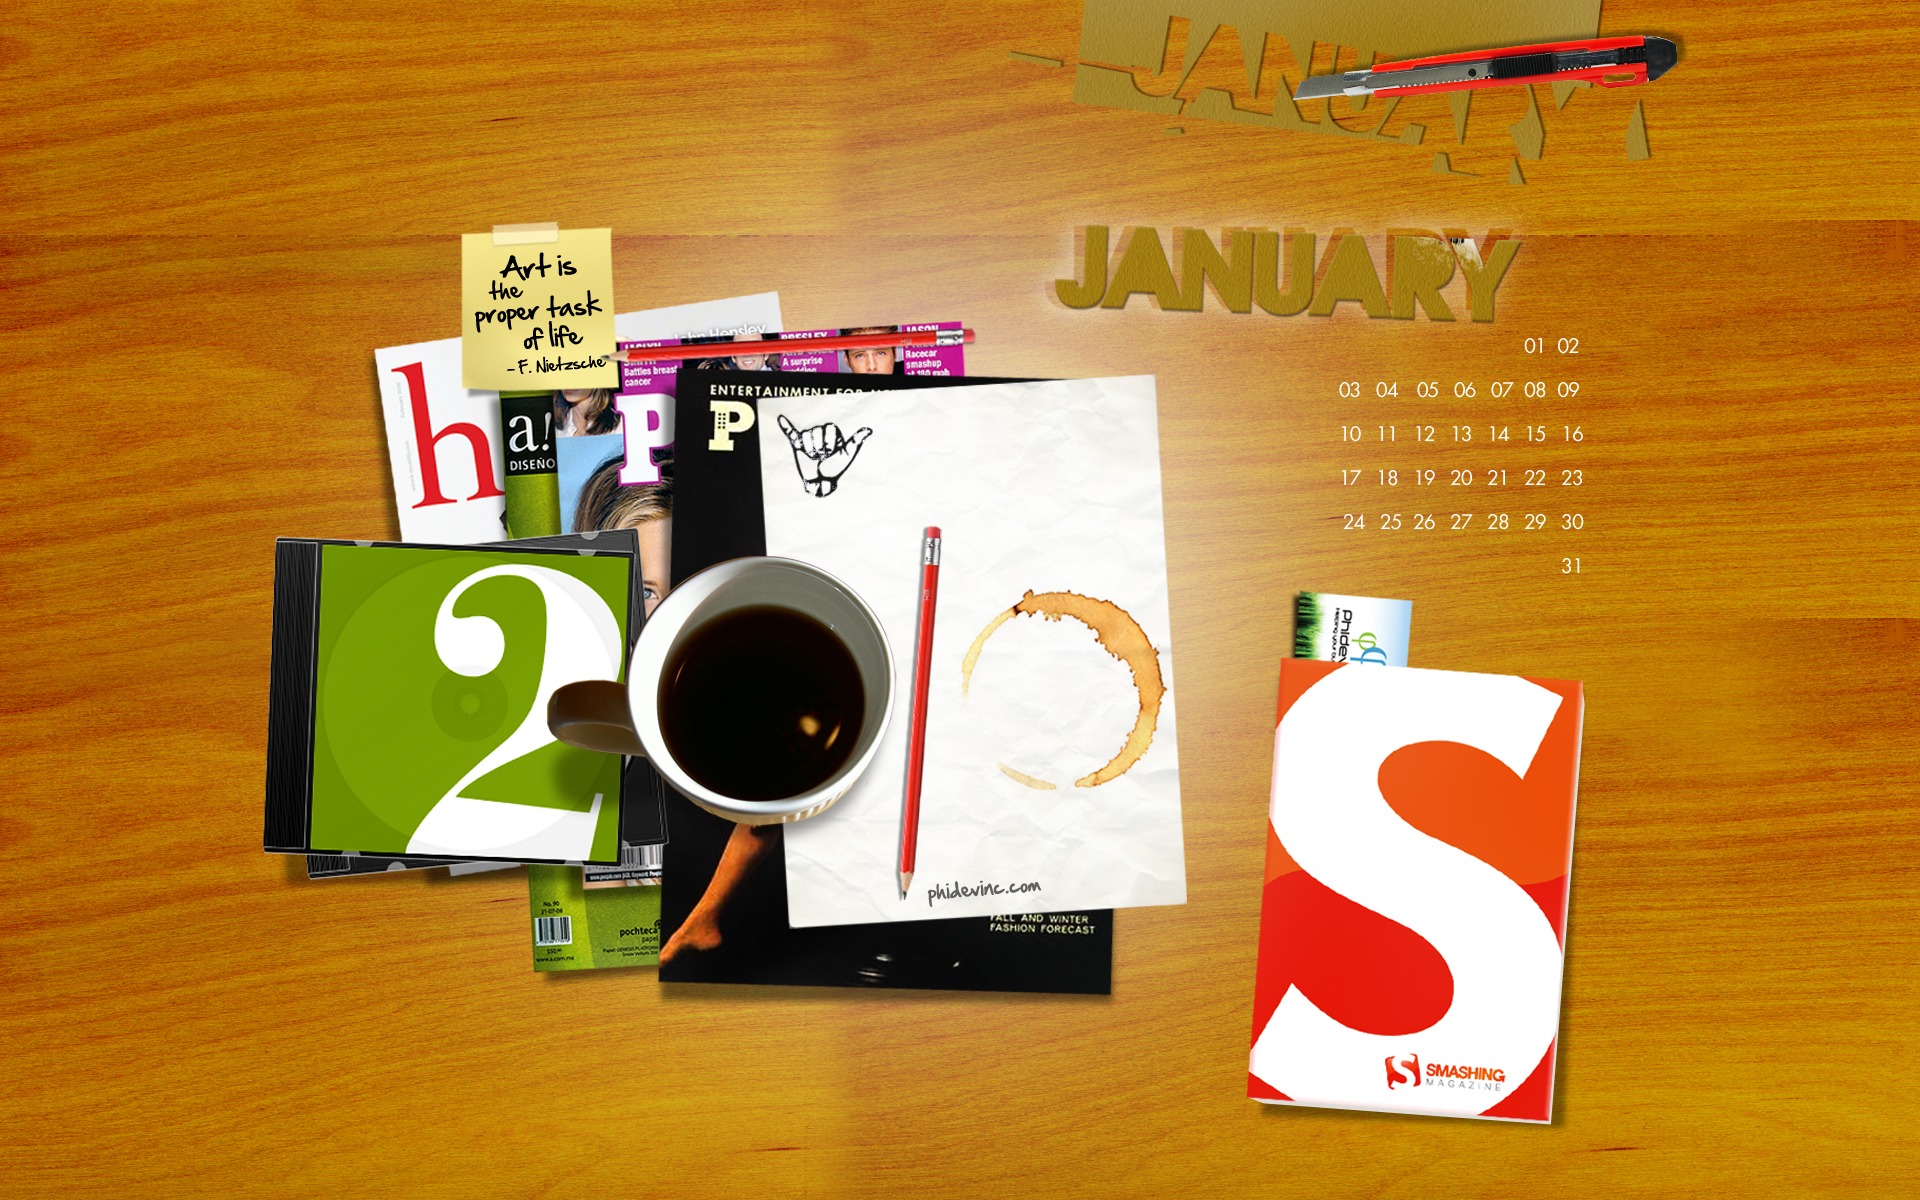 Microsoft Official Win7 New Year Wallpapers #12 - 1920x1200